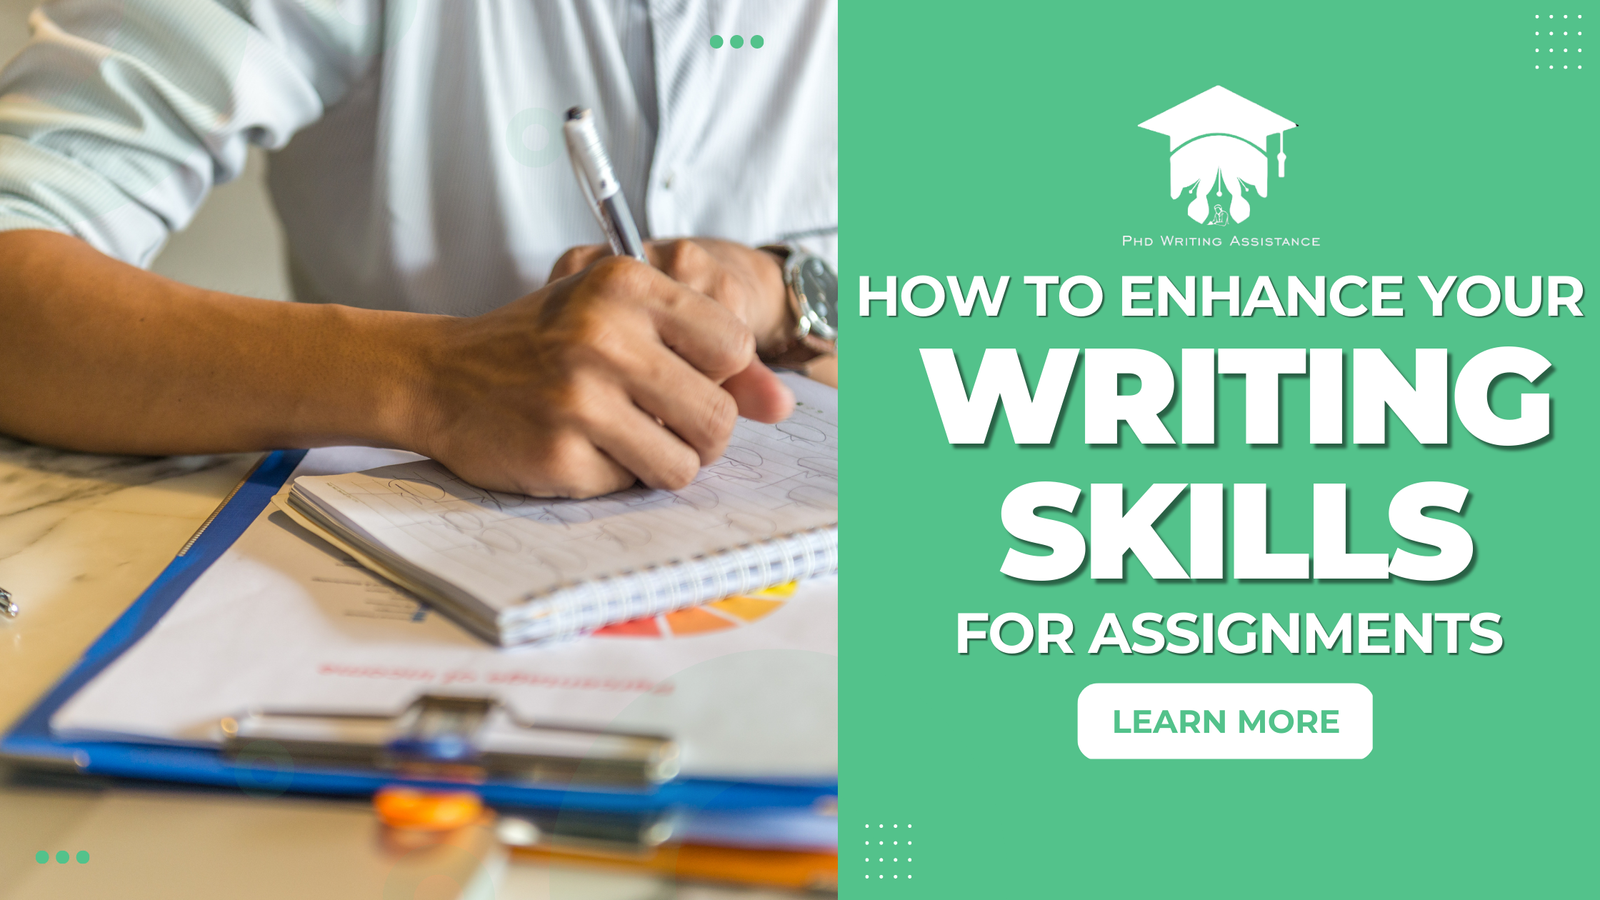 How to Enhance Your Writing Skills for Assignments